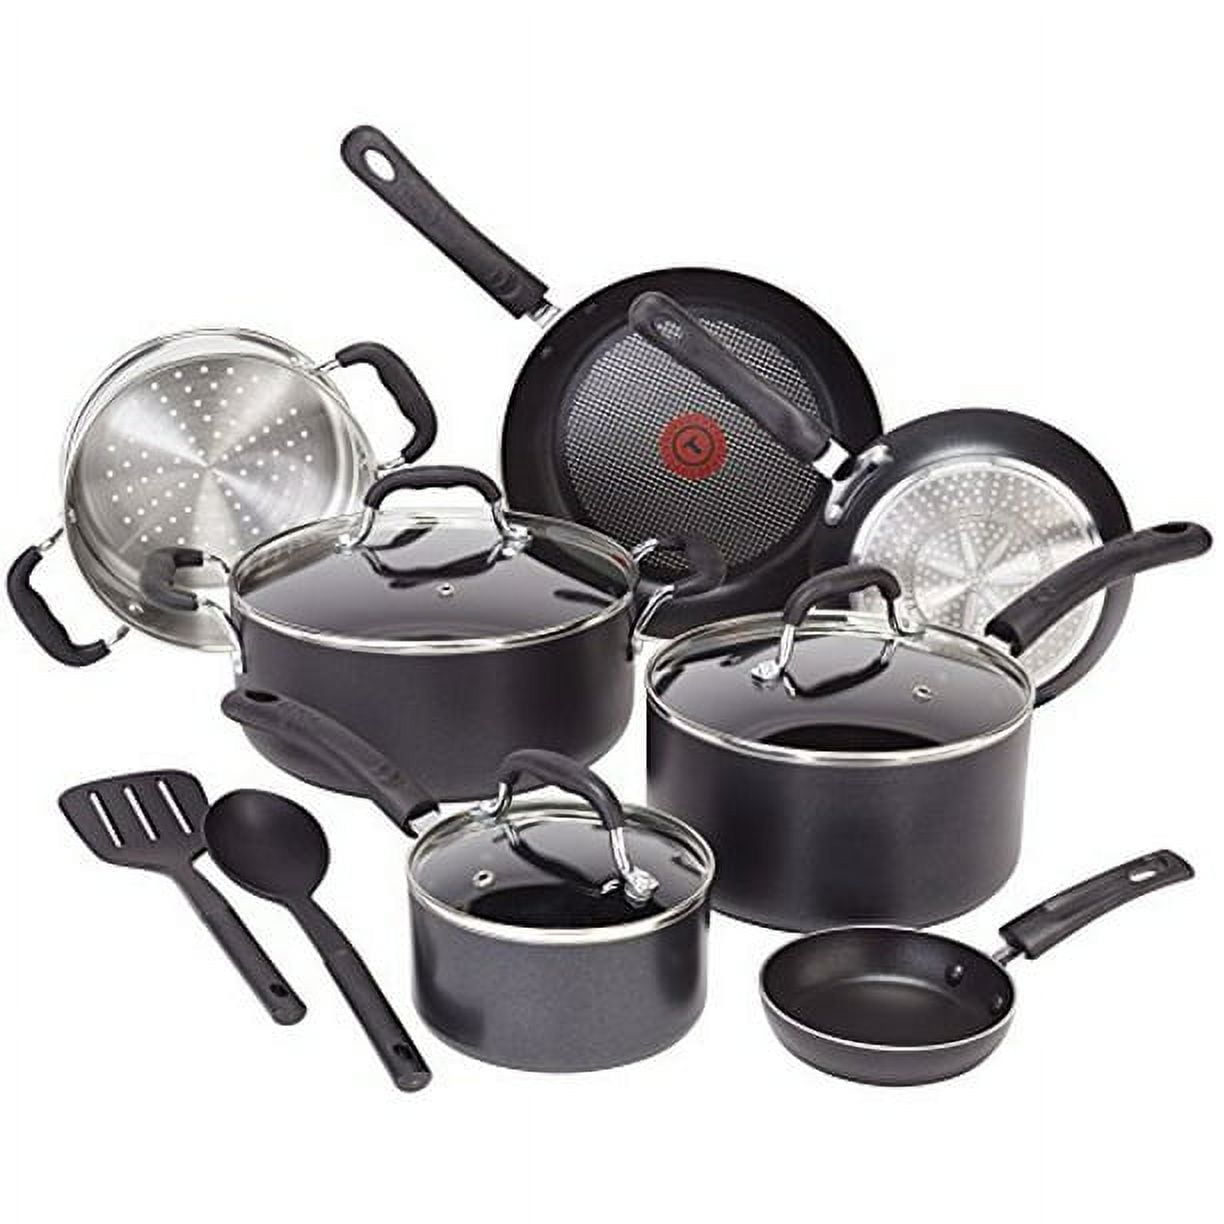 T-fal Induction Safe Cookware For The Home - JCPenney